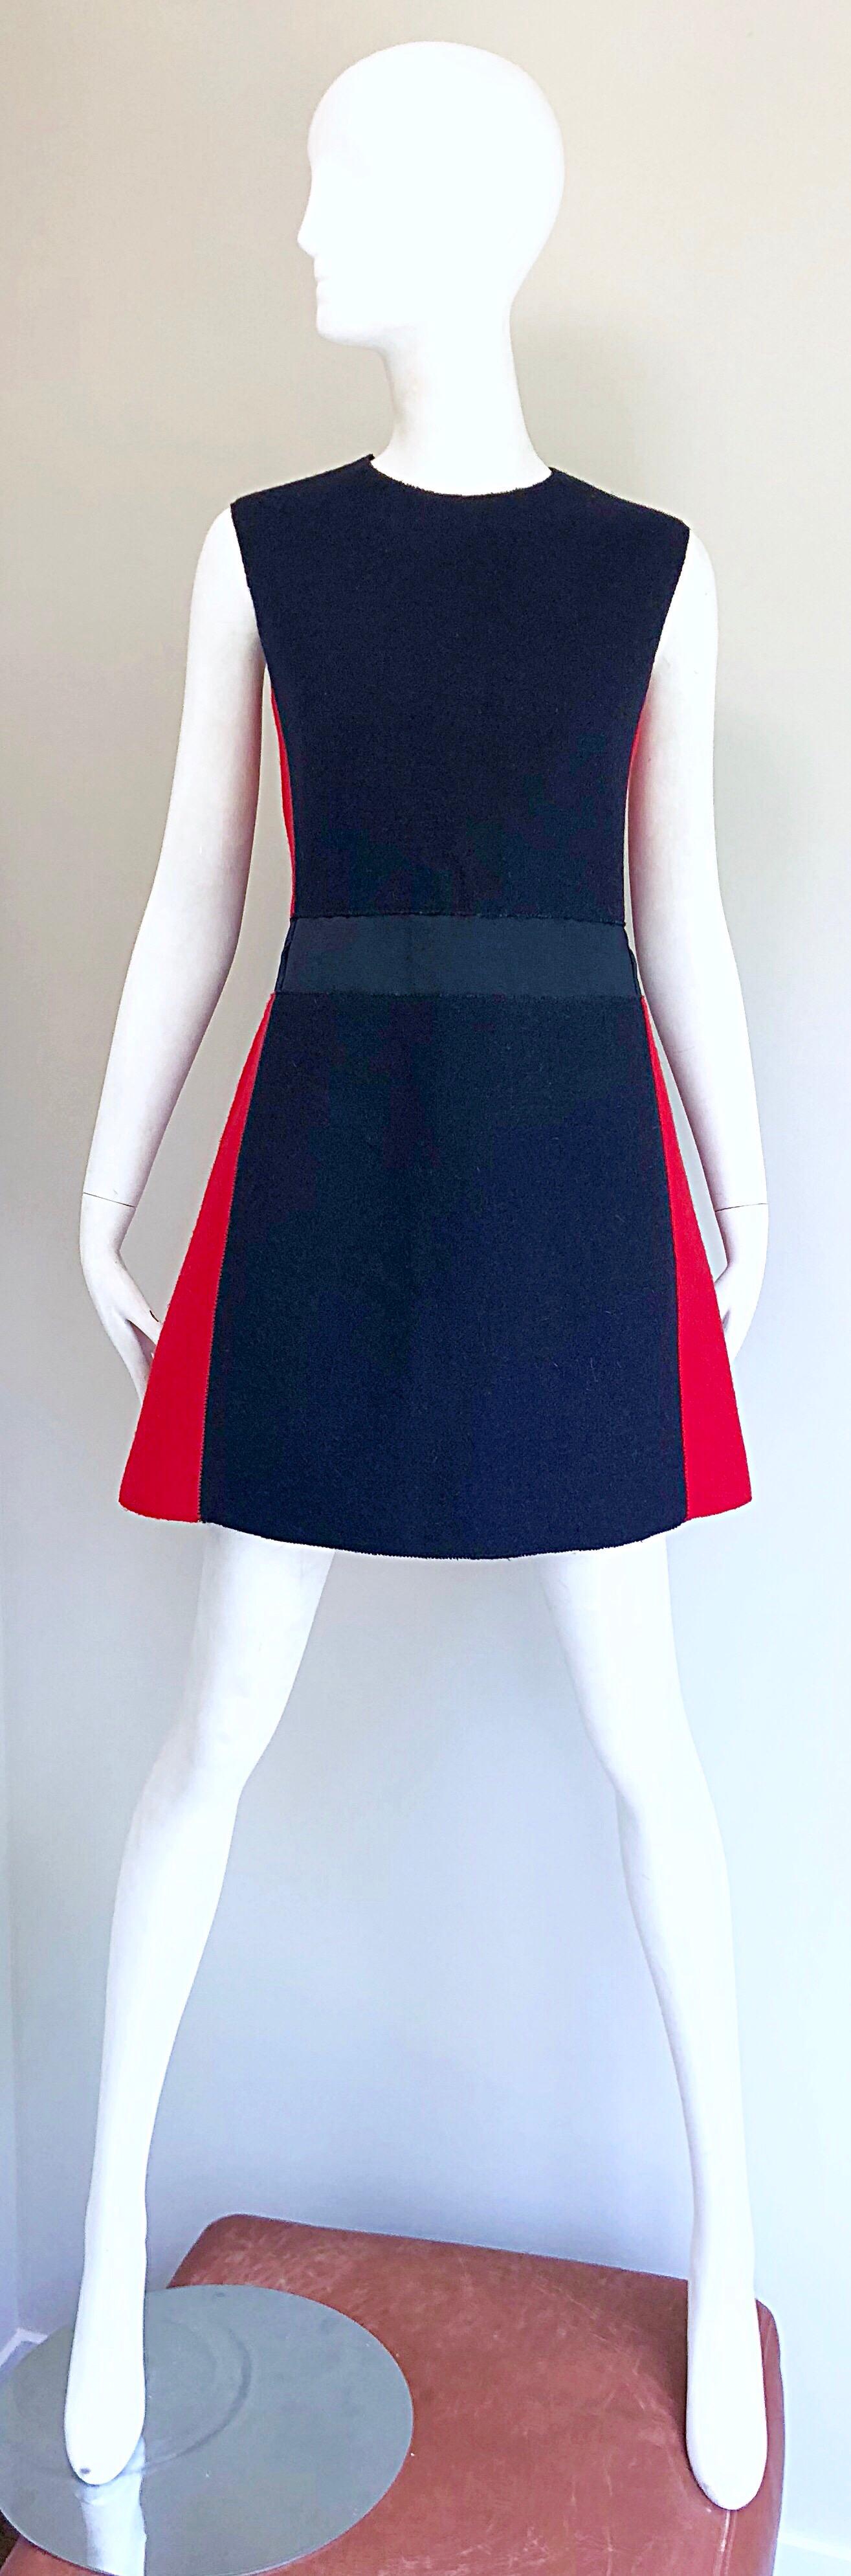 Miu Miu Early 2000s Navy Blue + Red Virgin Wool Size 44 US 8 A - Line Mod Dress For Sale 4